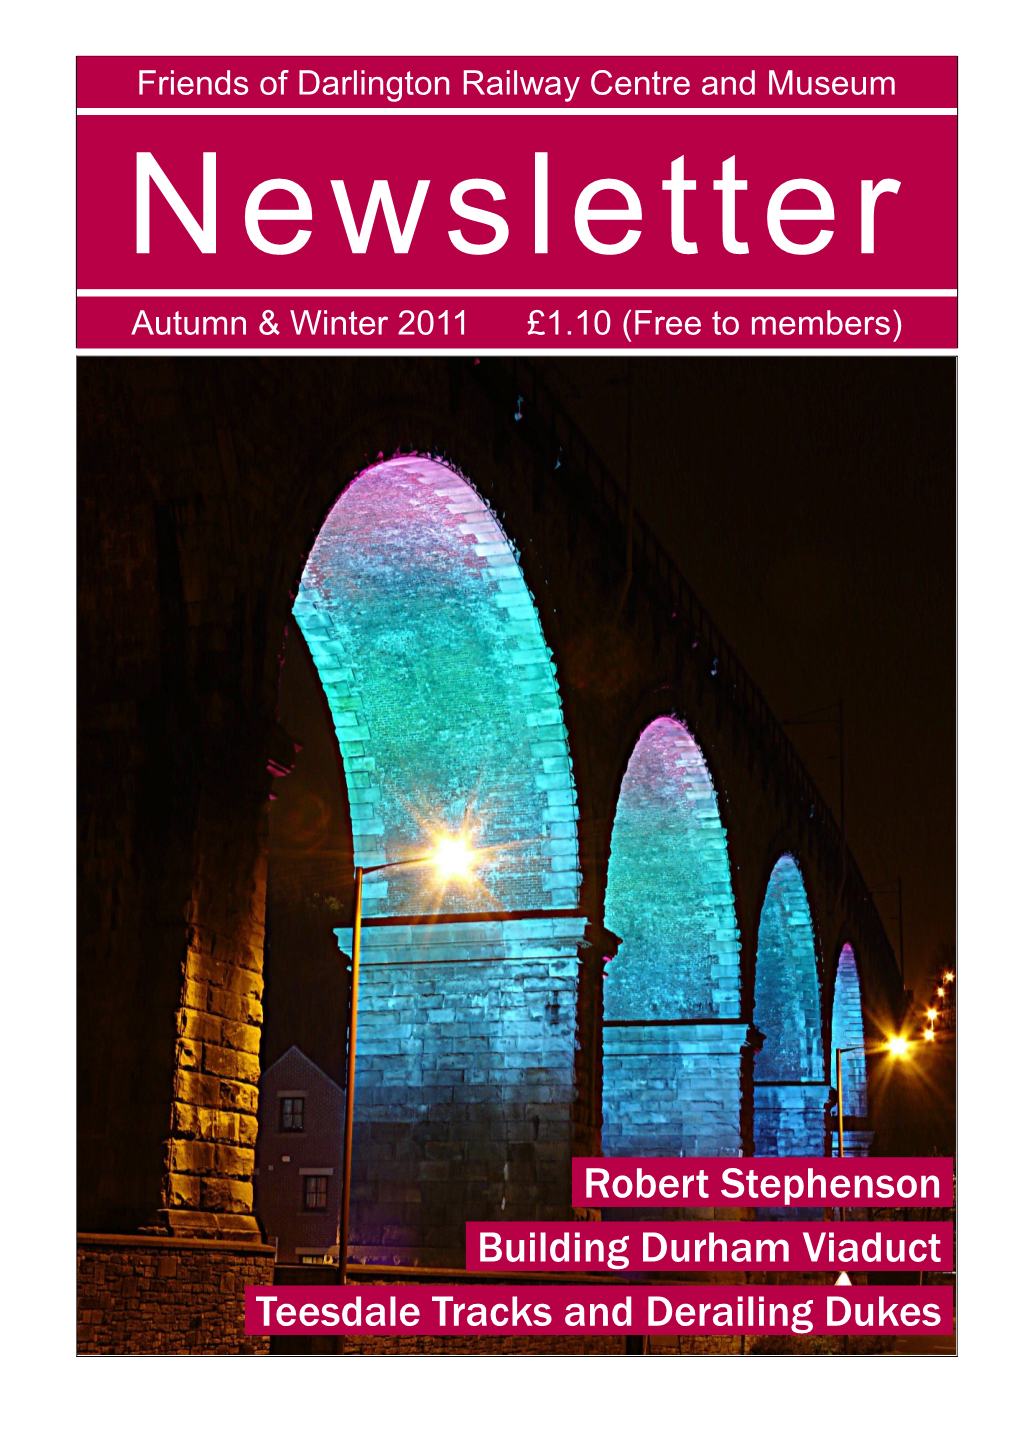 Newsletter Autumn & Winter 2011 £1.10 (Free to Members)